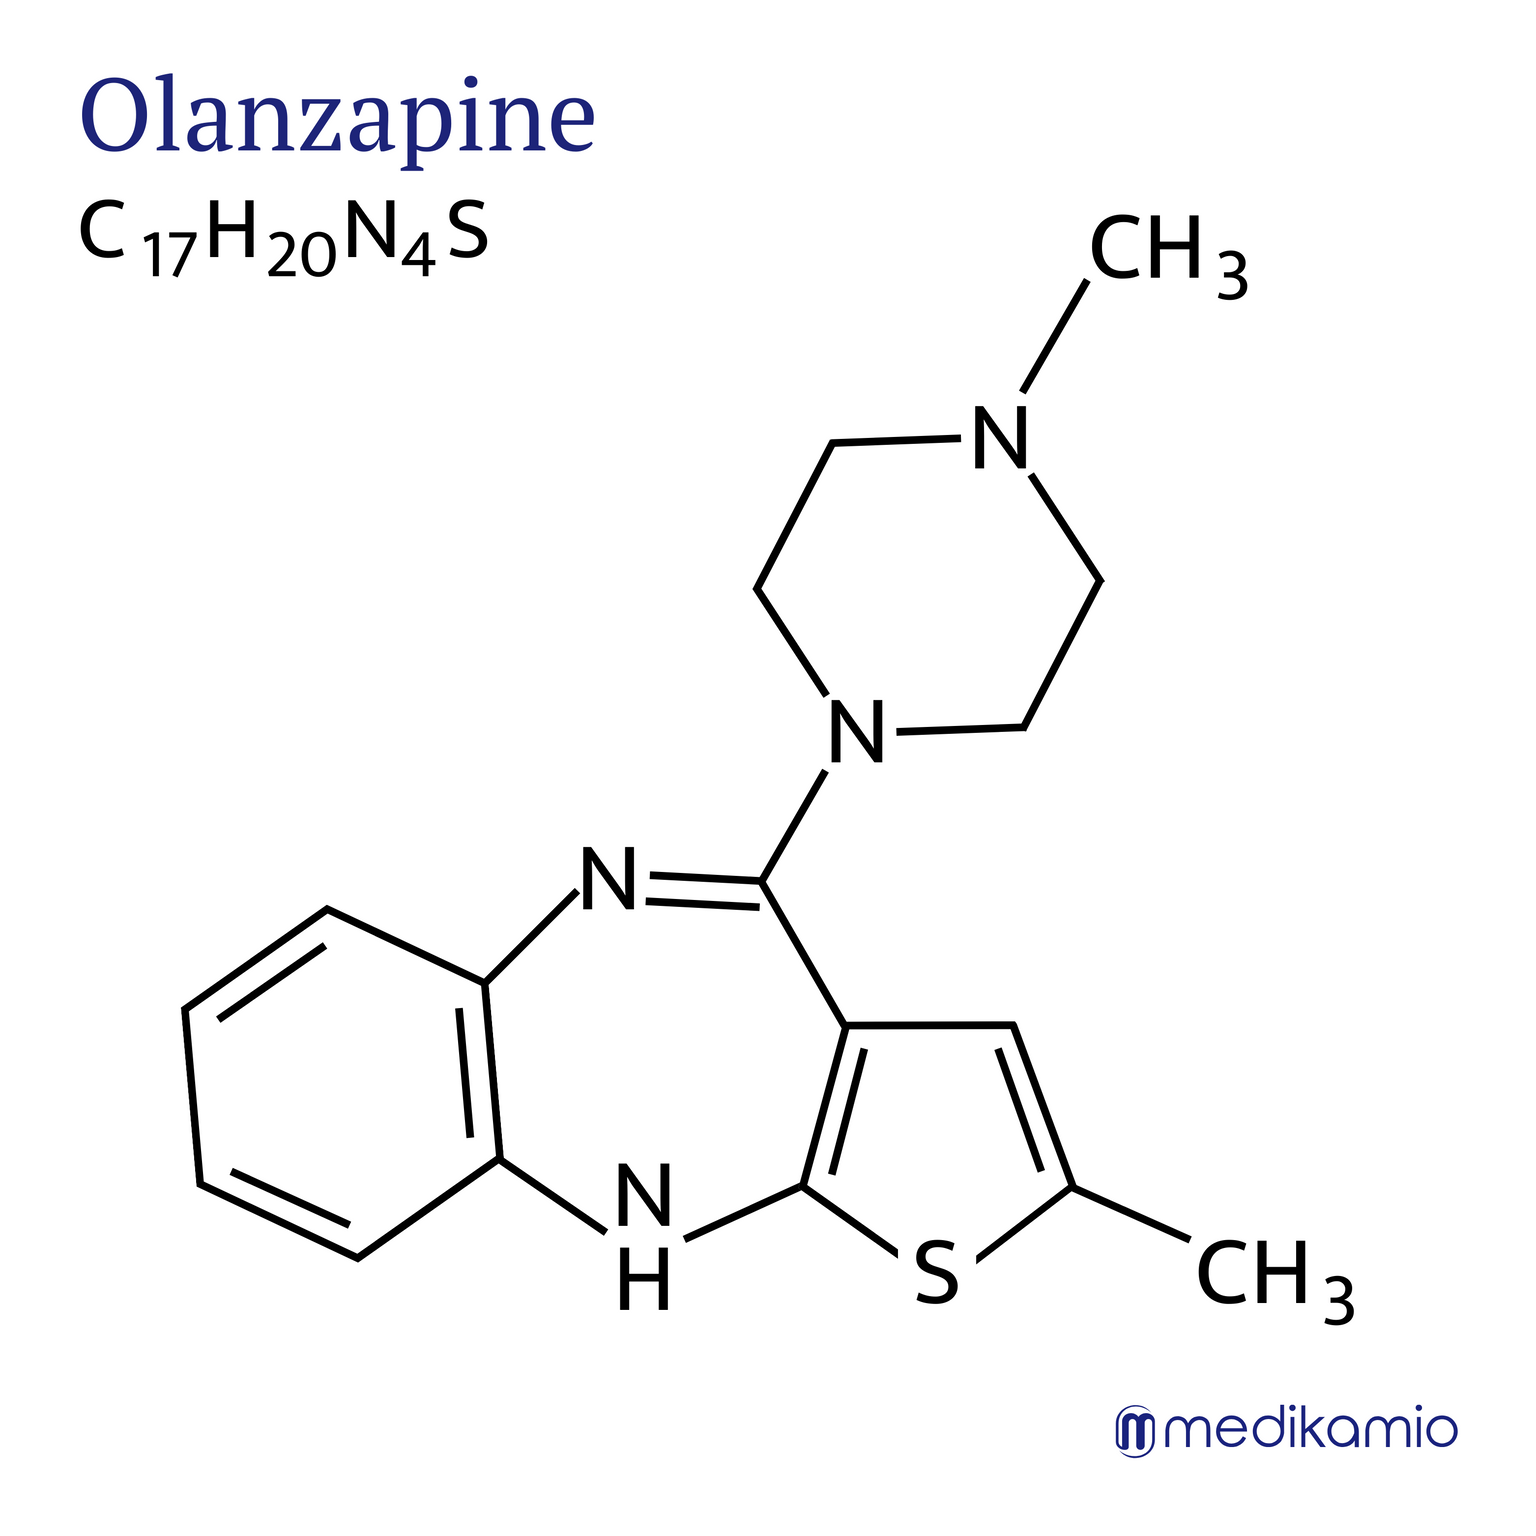 Graphic structural formula of the active substance olanzapine